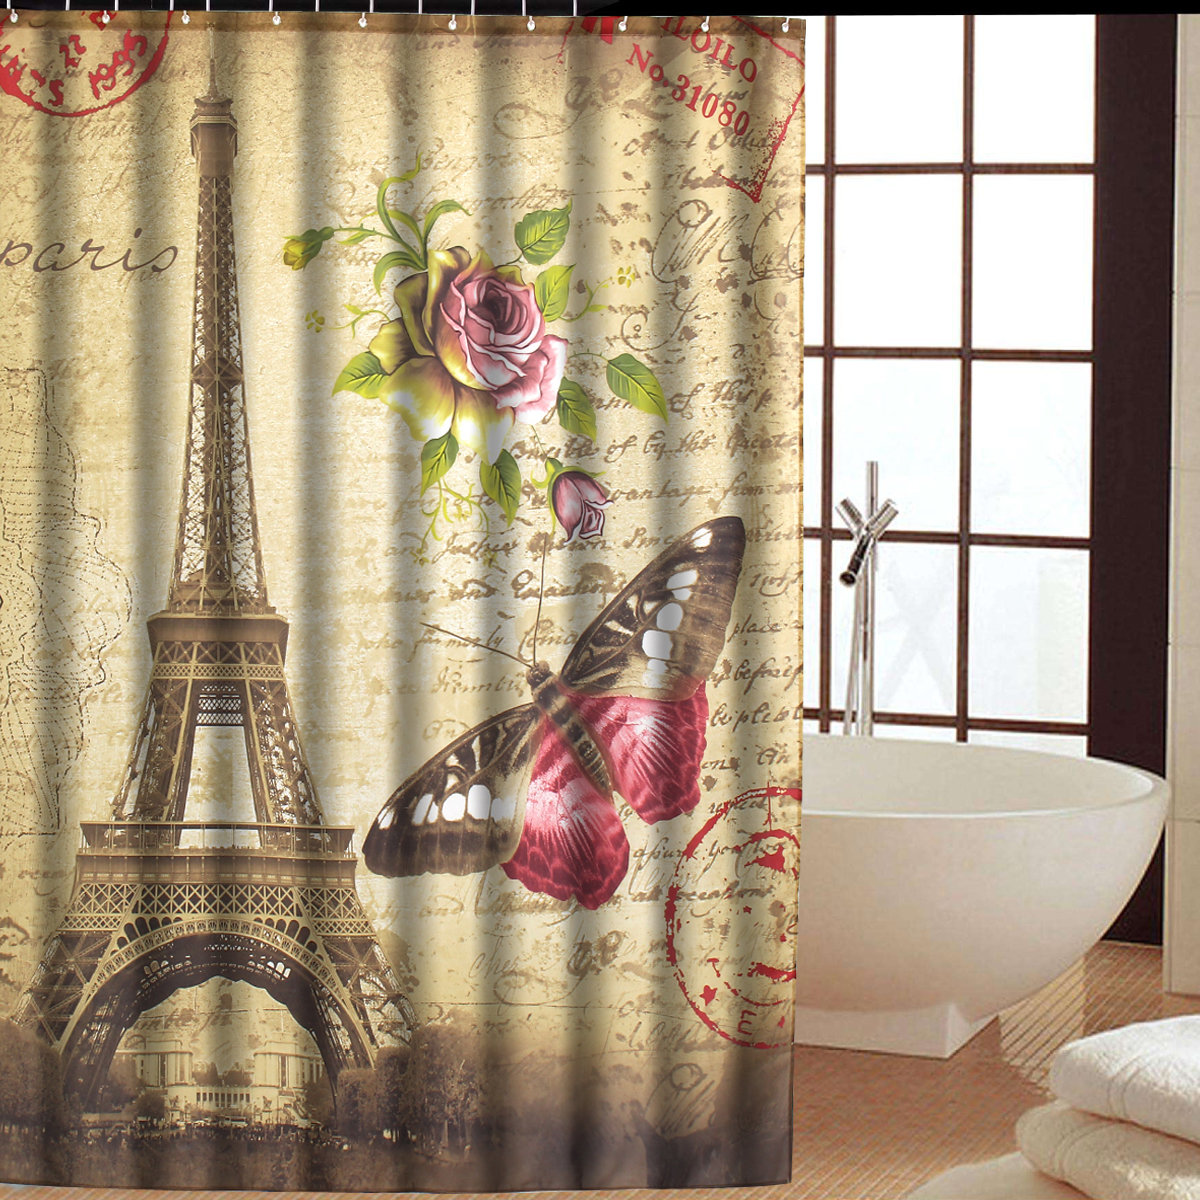 

2 Size Eiffel Tower Design Waterproof Bathroom Curtain Polyester Fabric Bath Curtain With Hooks, White